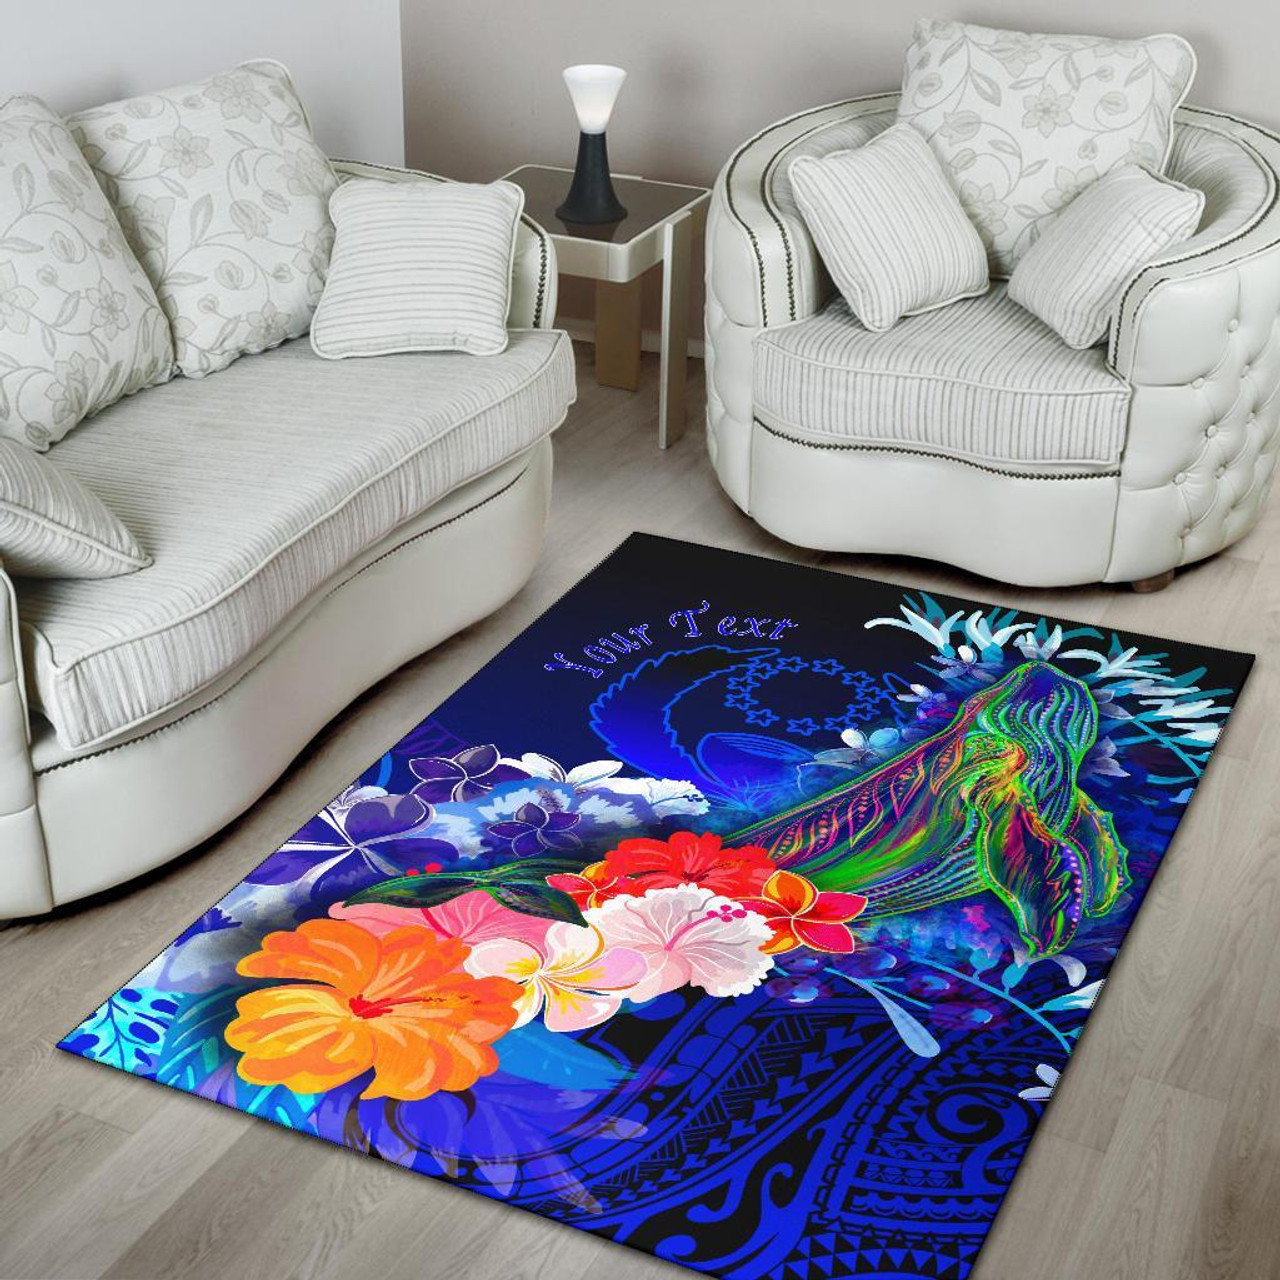 Pohnpei Custom Personalised Area Rug - Humpback Whale with Tropical Flowers (Blue) Polynesian 4